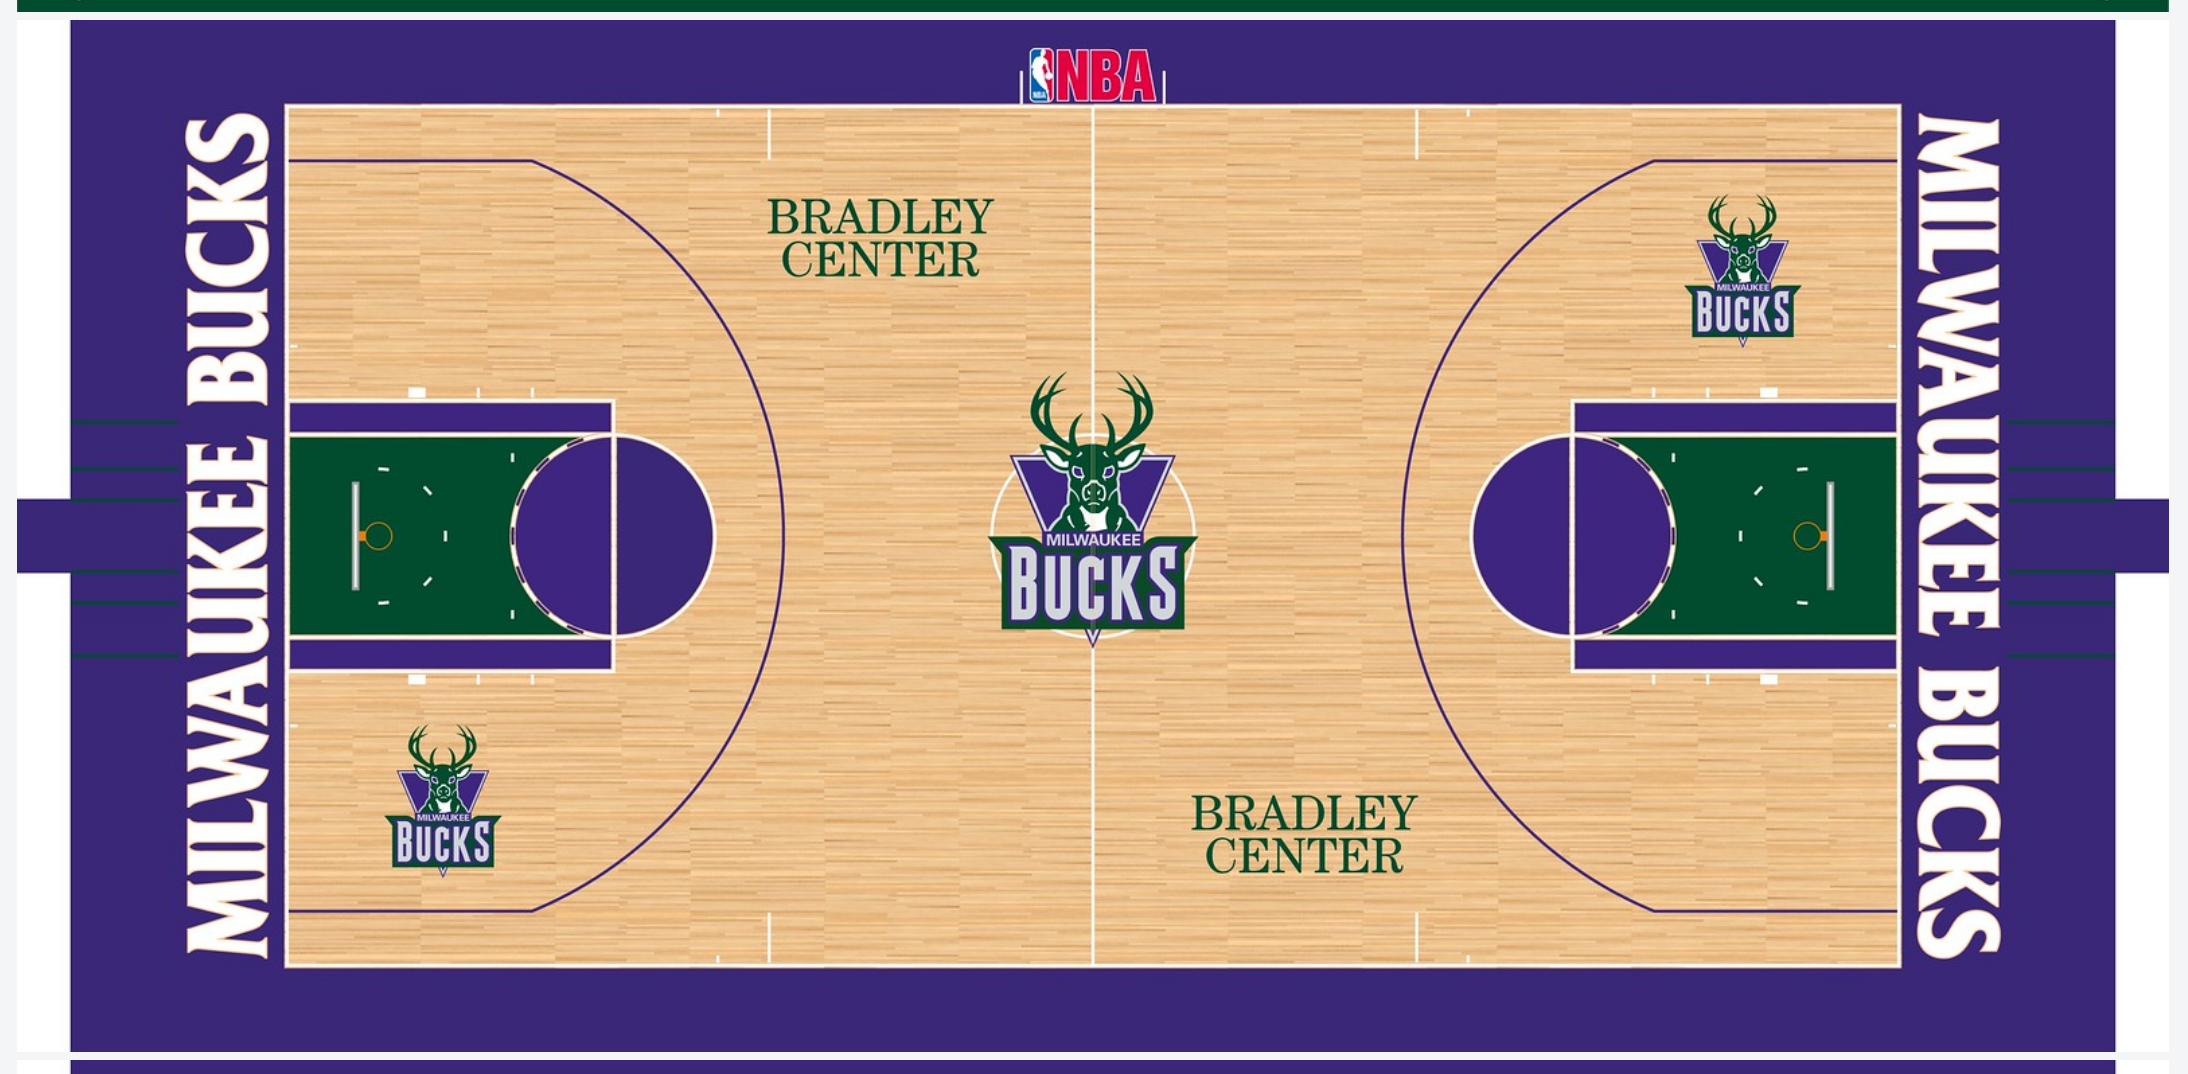 Fun fact: the bucks court design is made up of multiple letter Ms